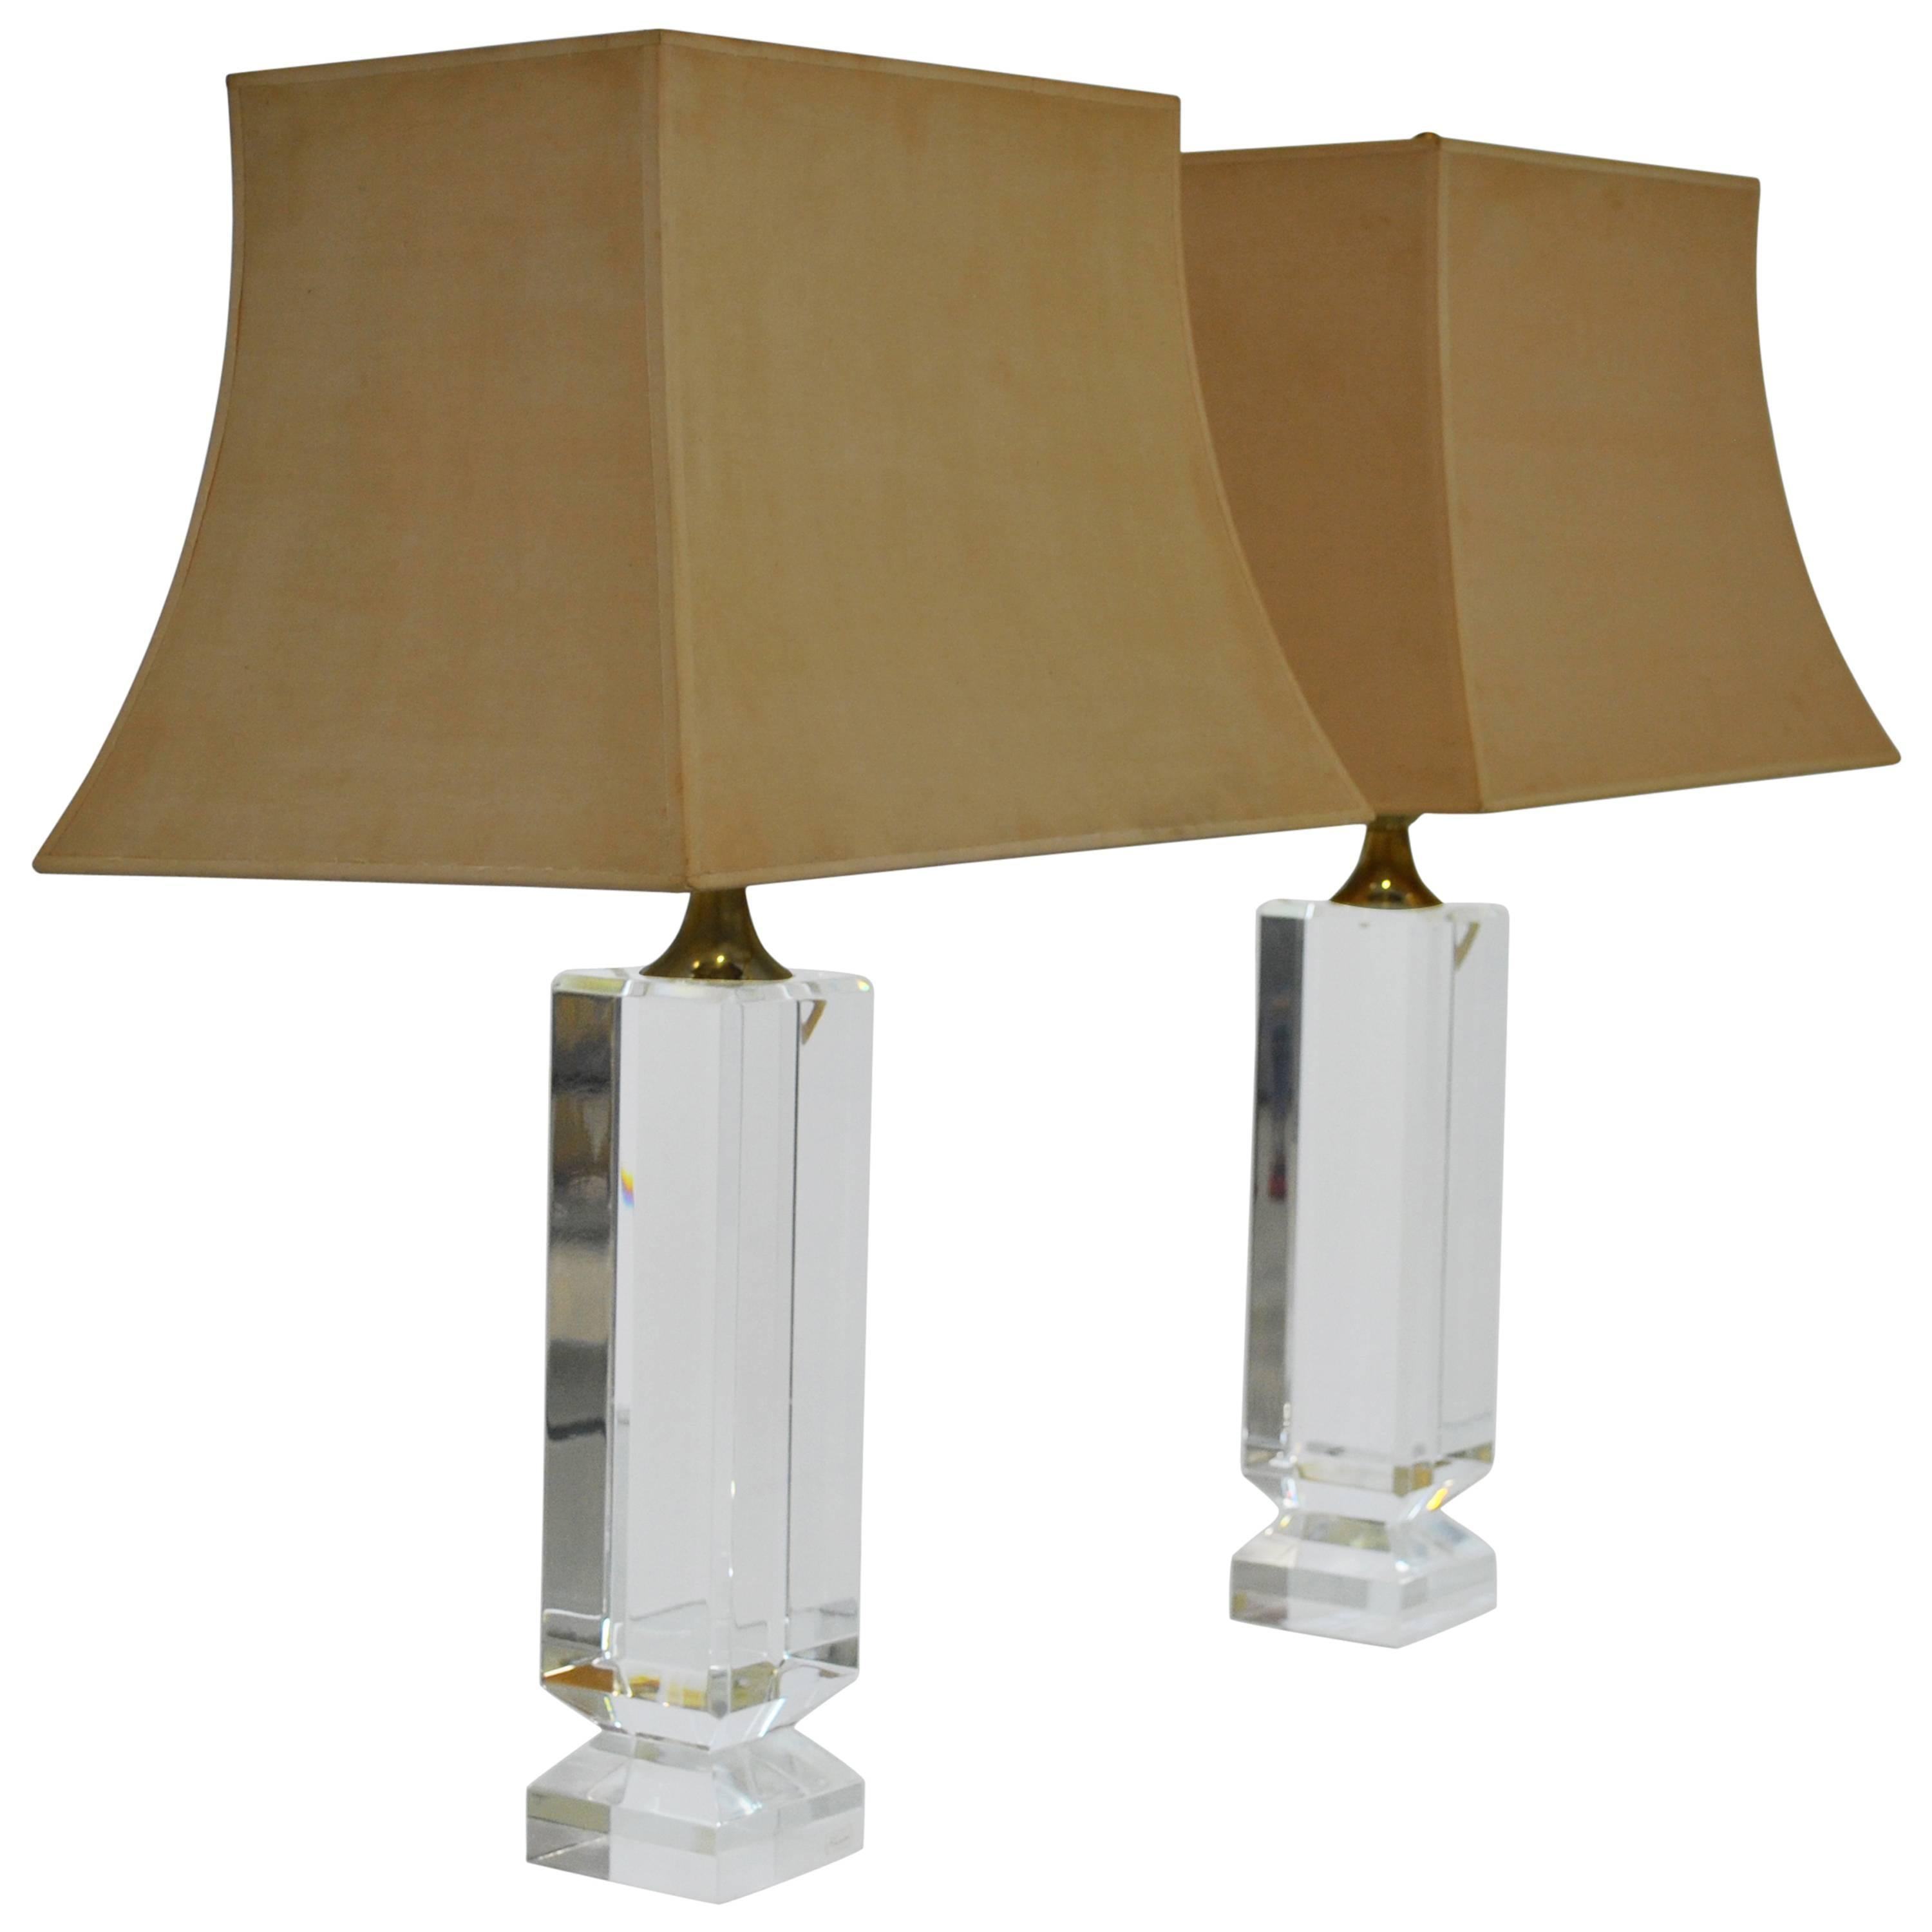 Pair of Signed "Renato" Lucite Block Table Lamps, 1970s For Sale